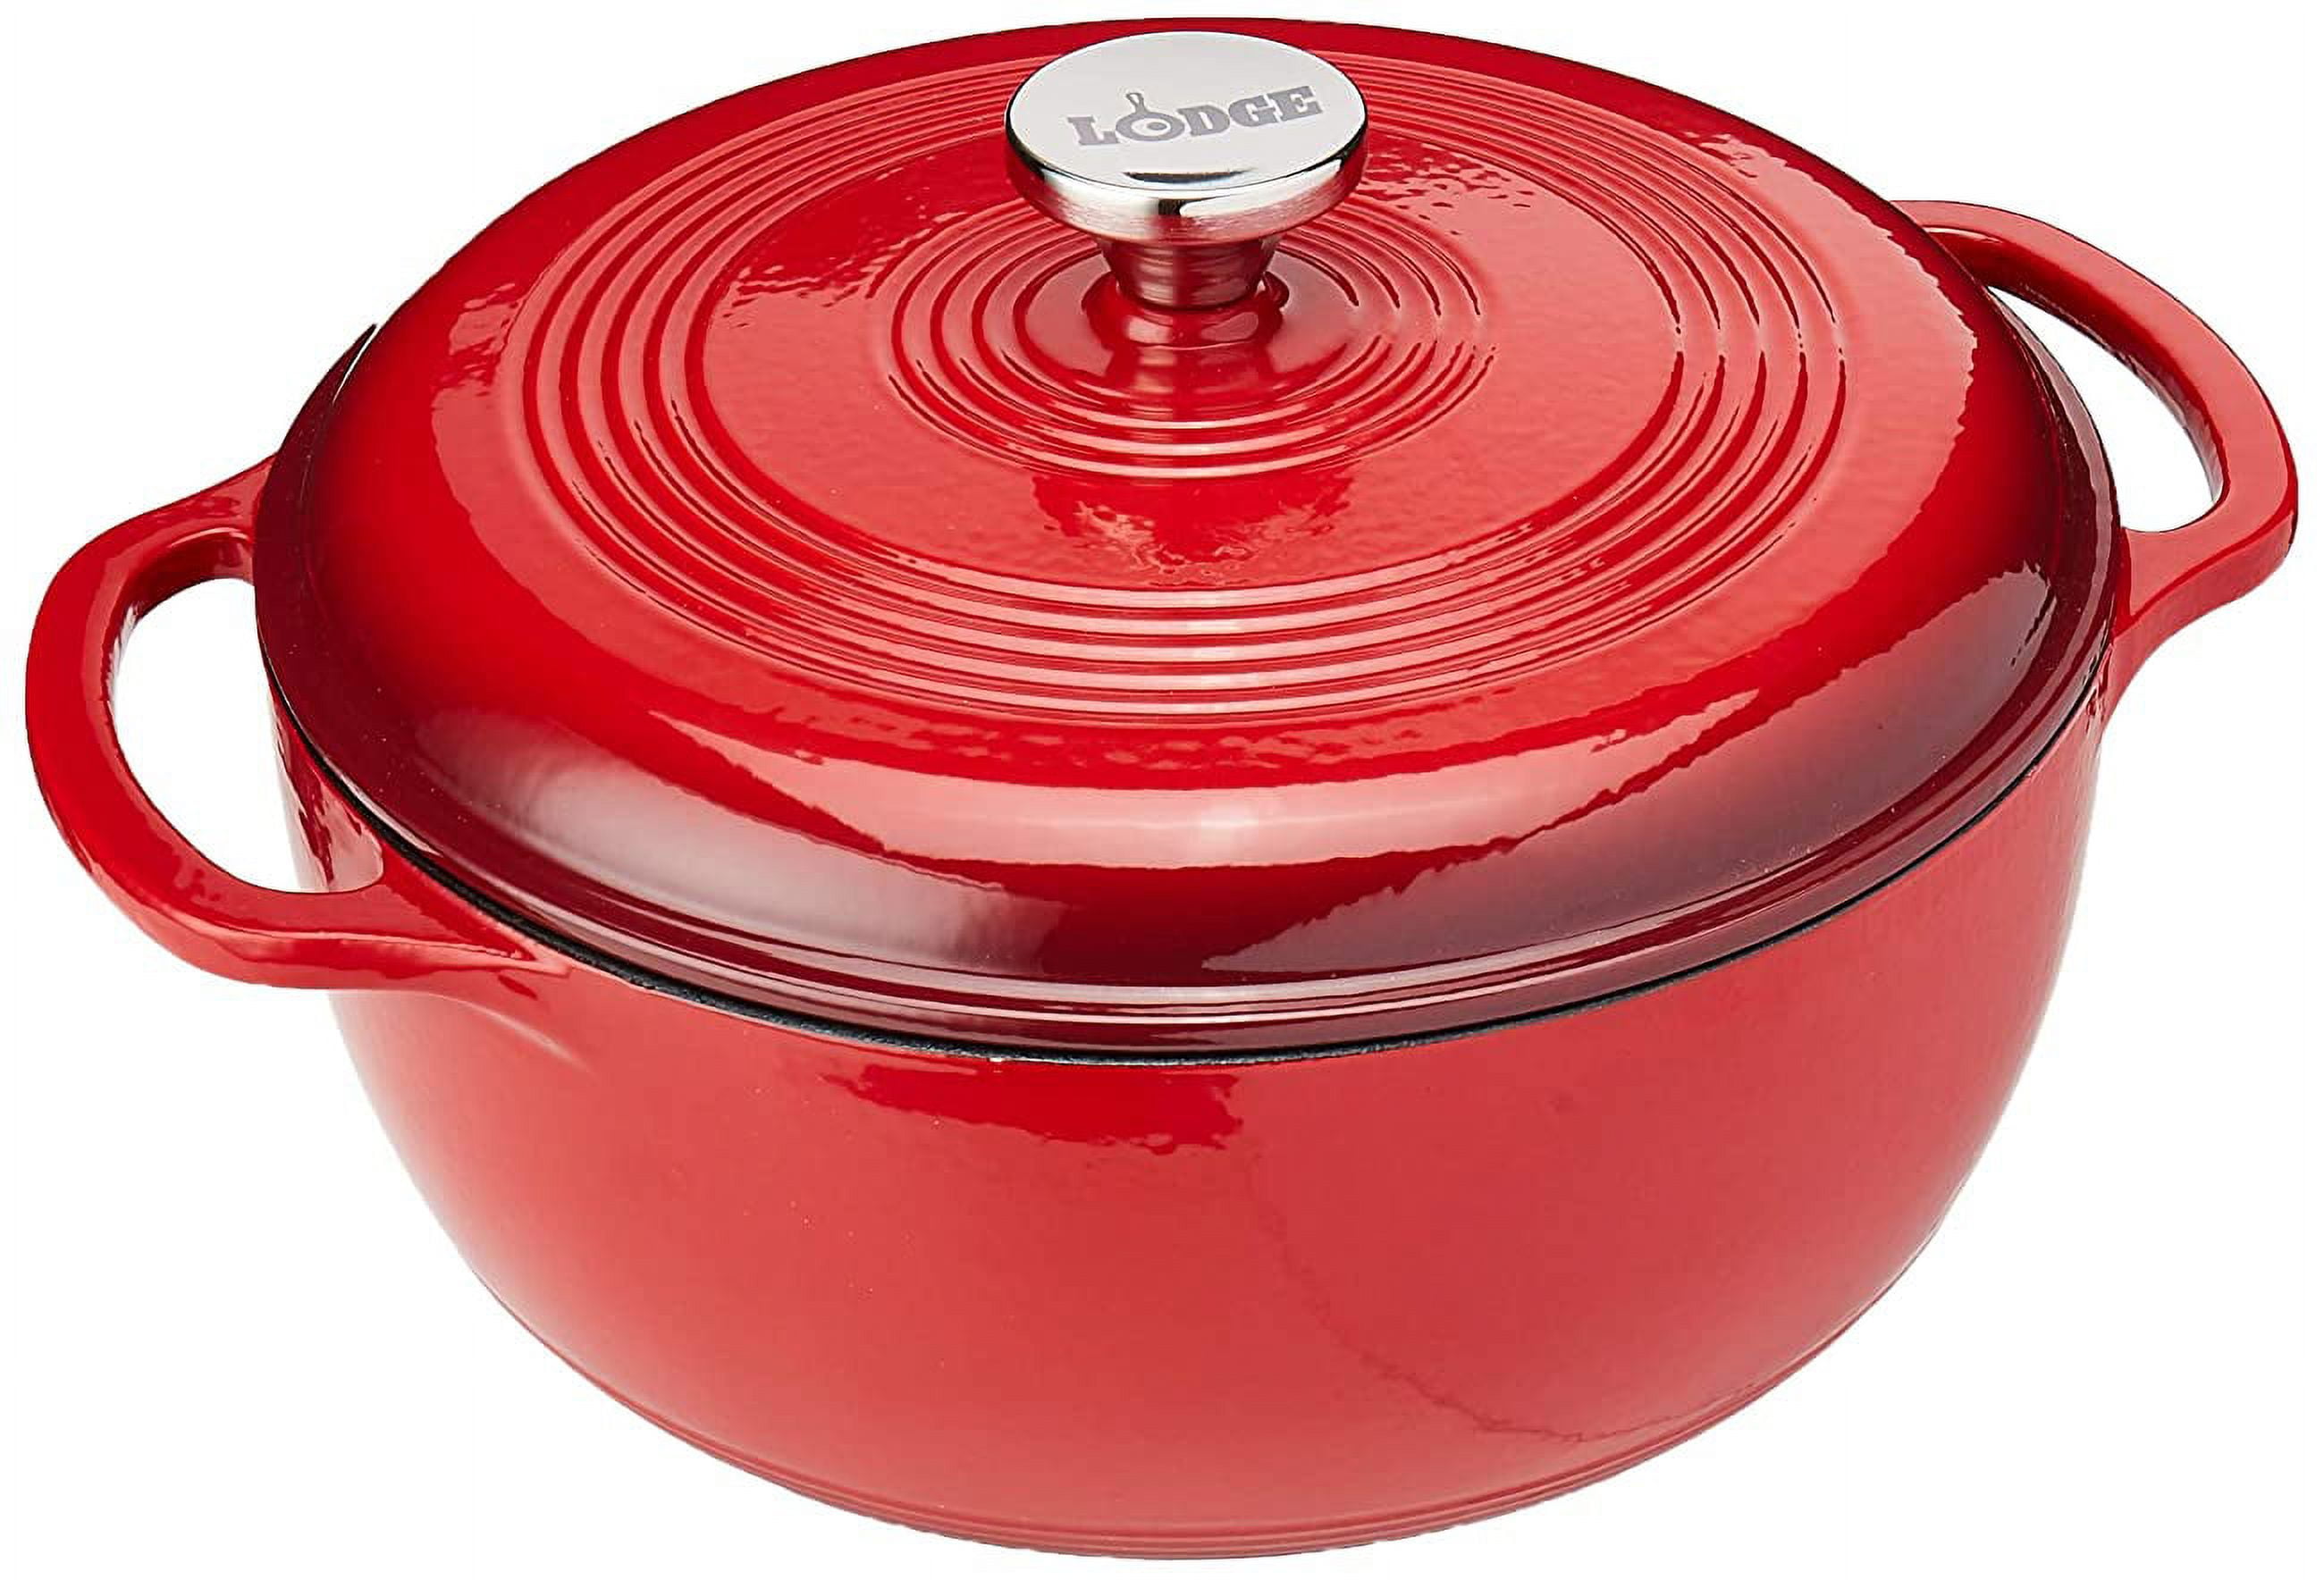 Lodge Cast Iron 6 Quart Enameled Dutch Oven in Red